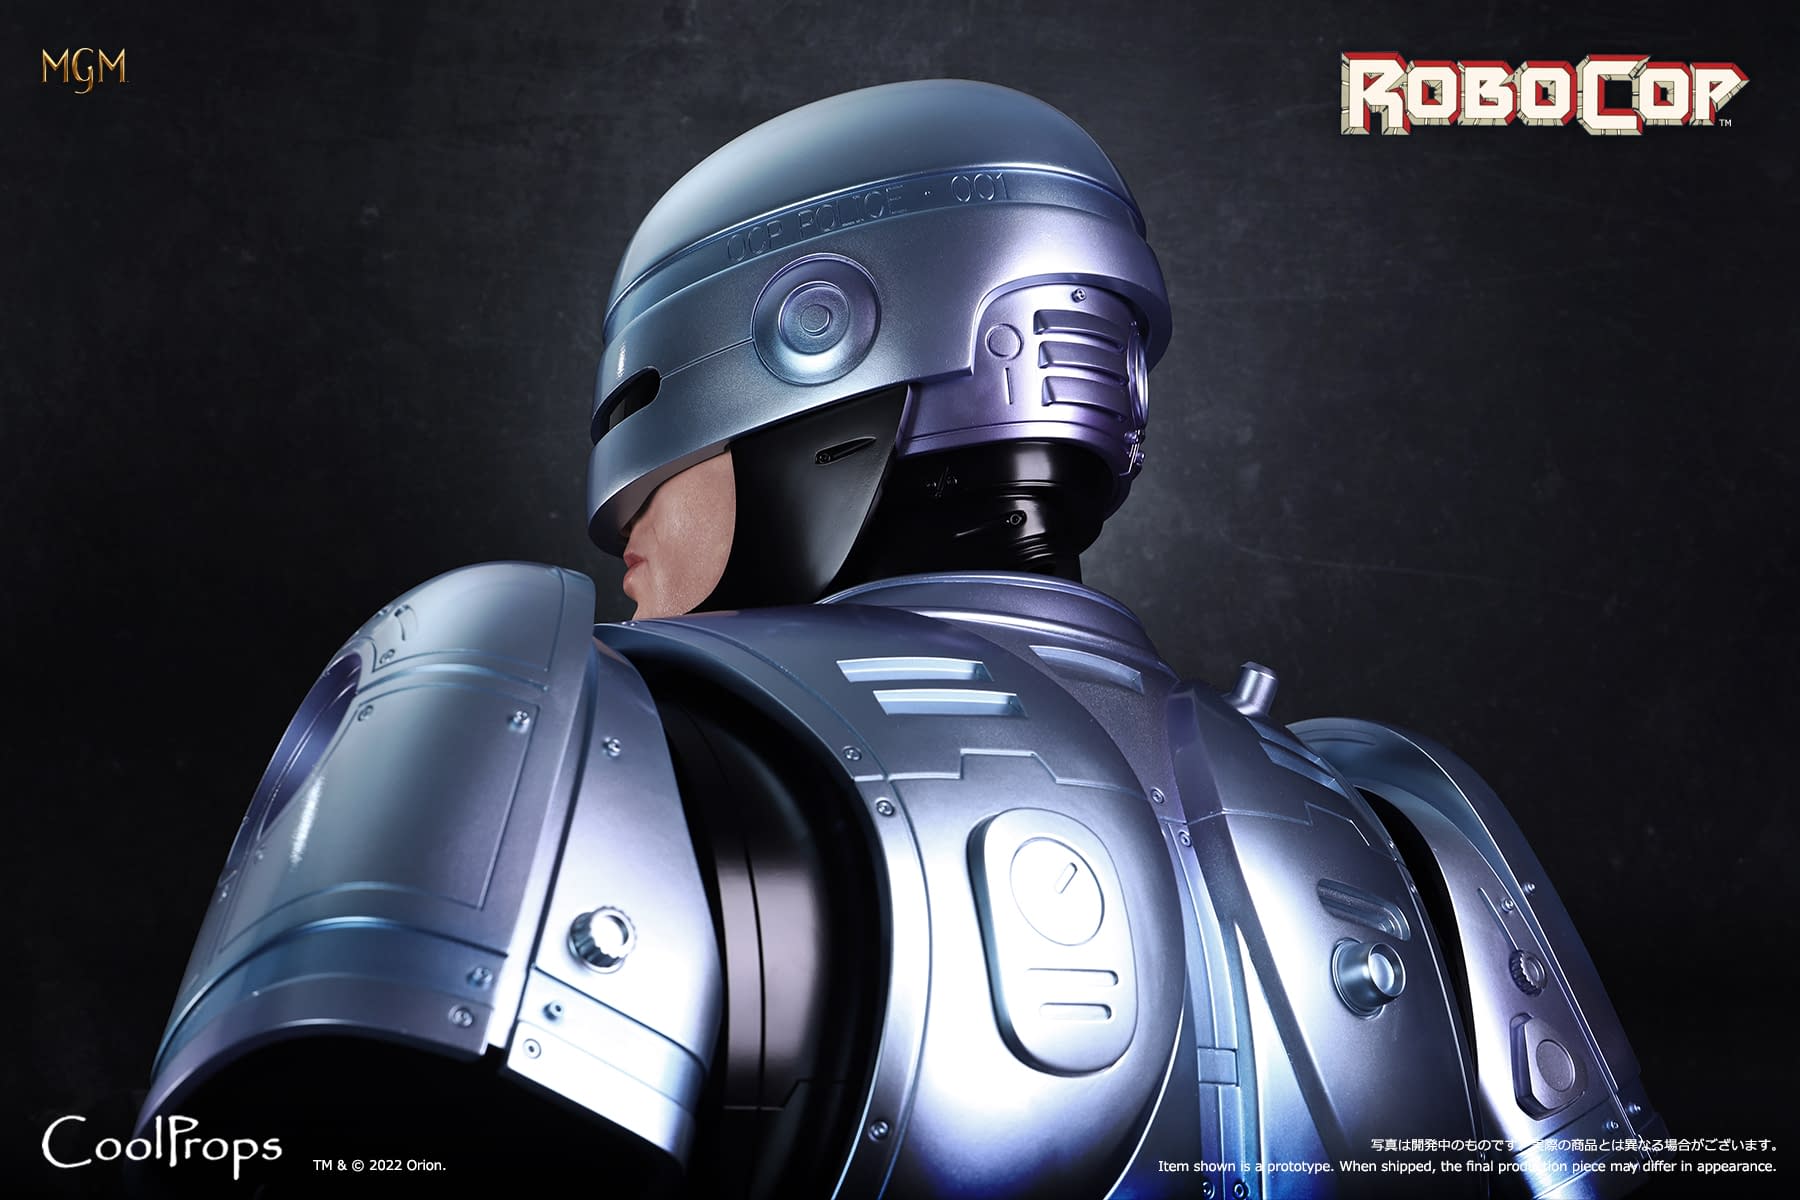 Robocop Receives $3,000 Life-Size Bust Replica Arrives from CoolProps